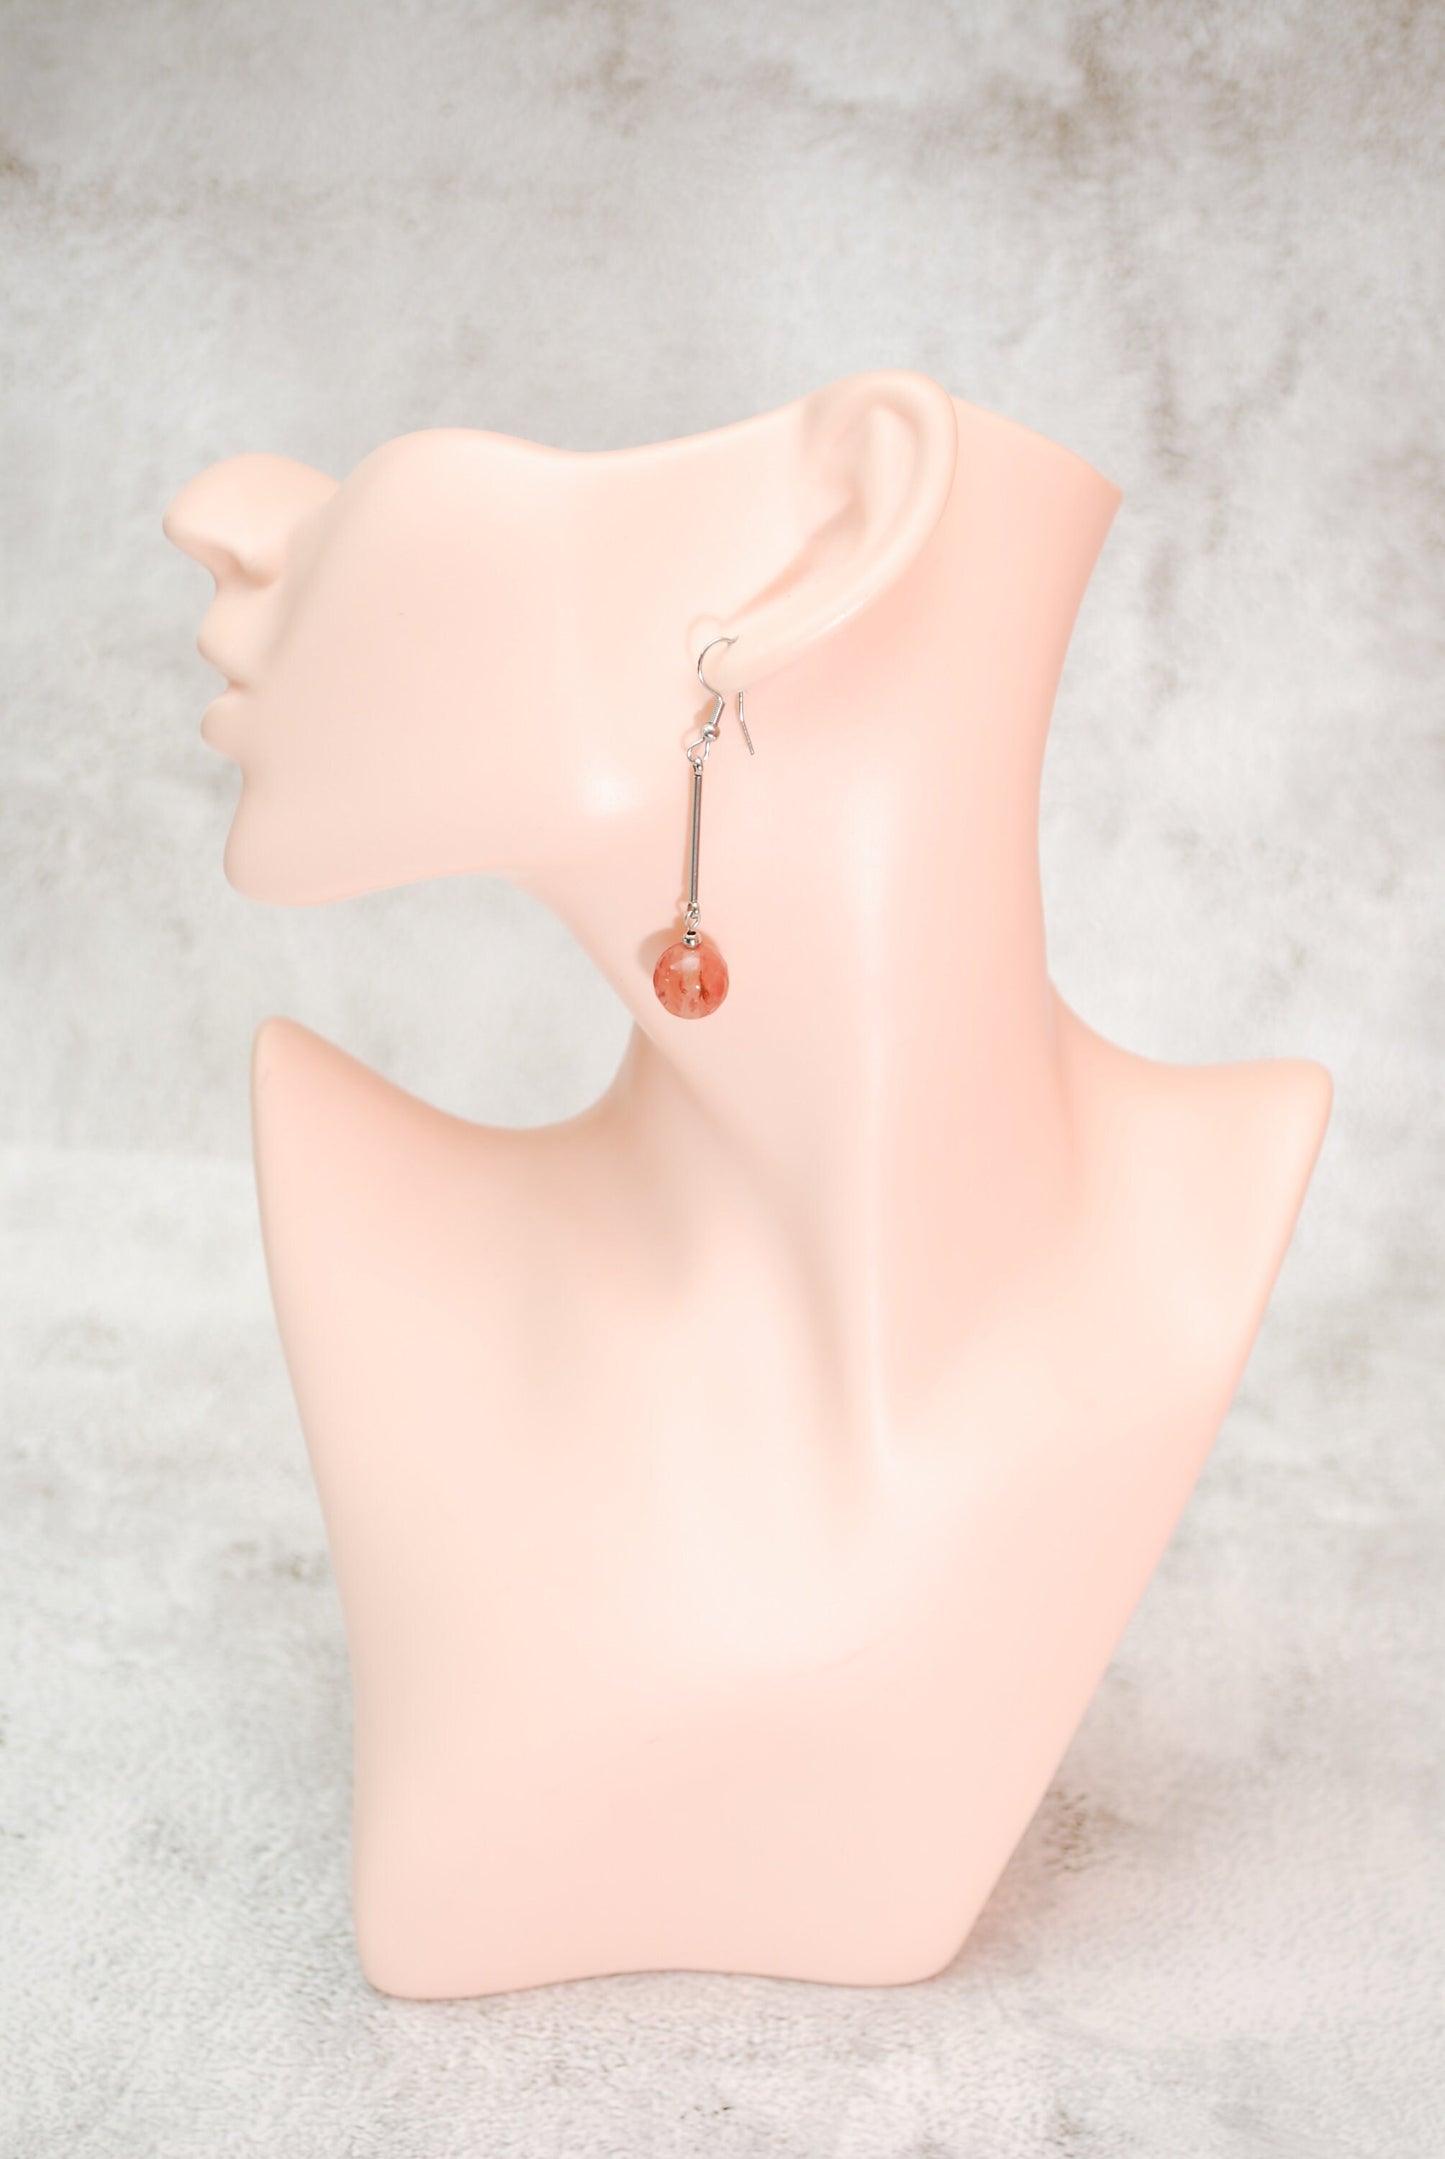 Estibela's Big Agate Stone Pink Beaded Earrings - Lightweight Stainless Steel Earrings for Boho Chic Style,  6cm 2.5 inches